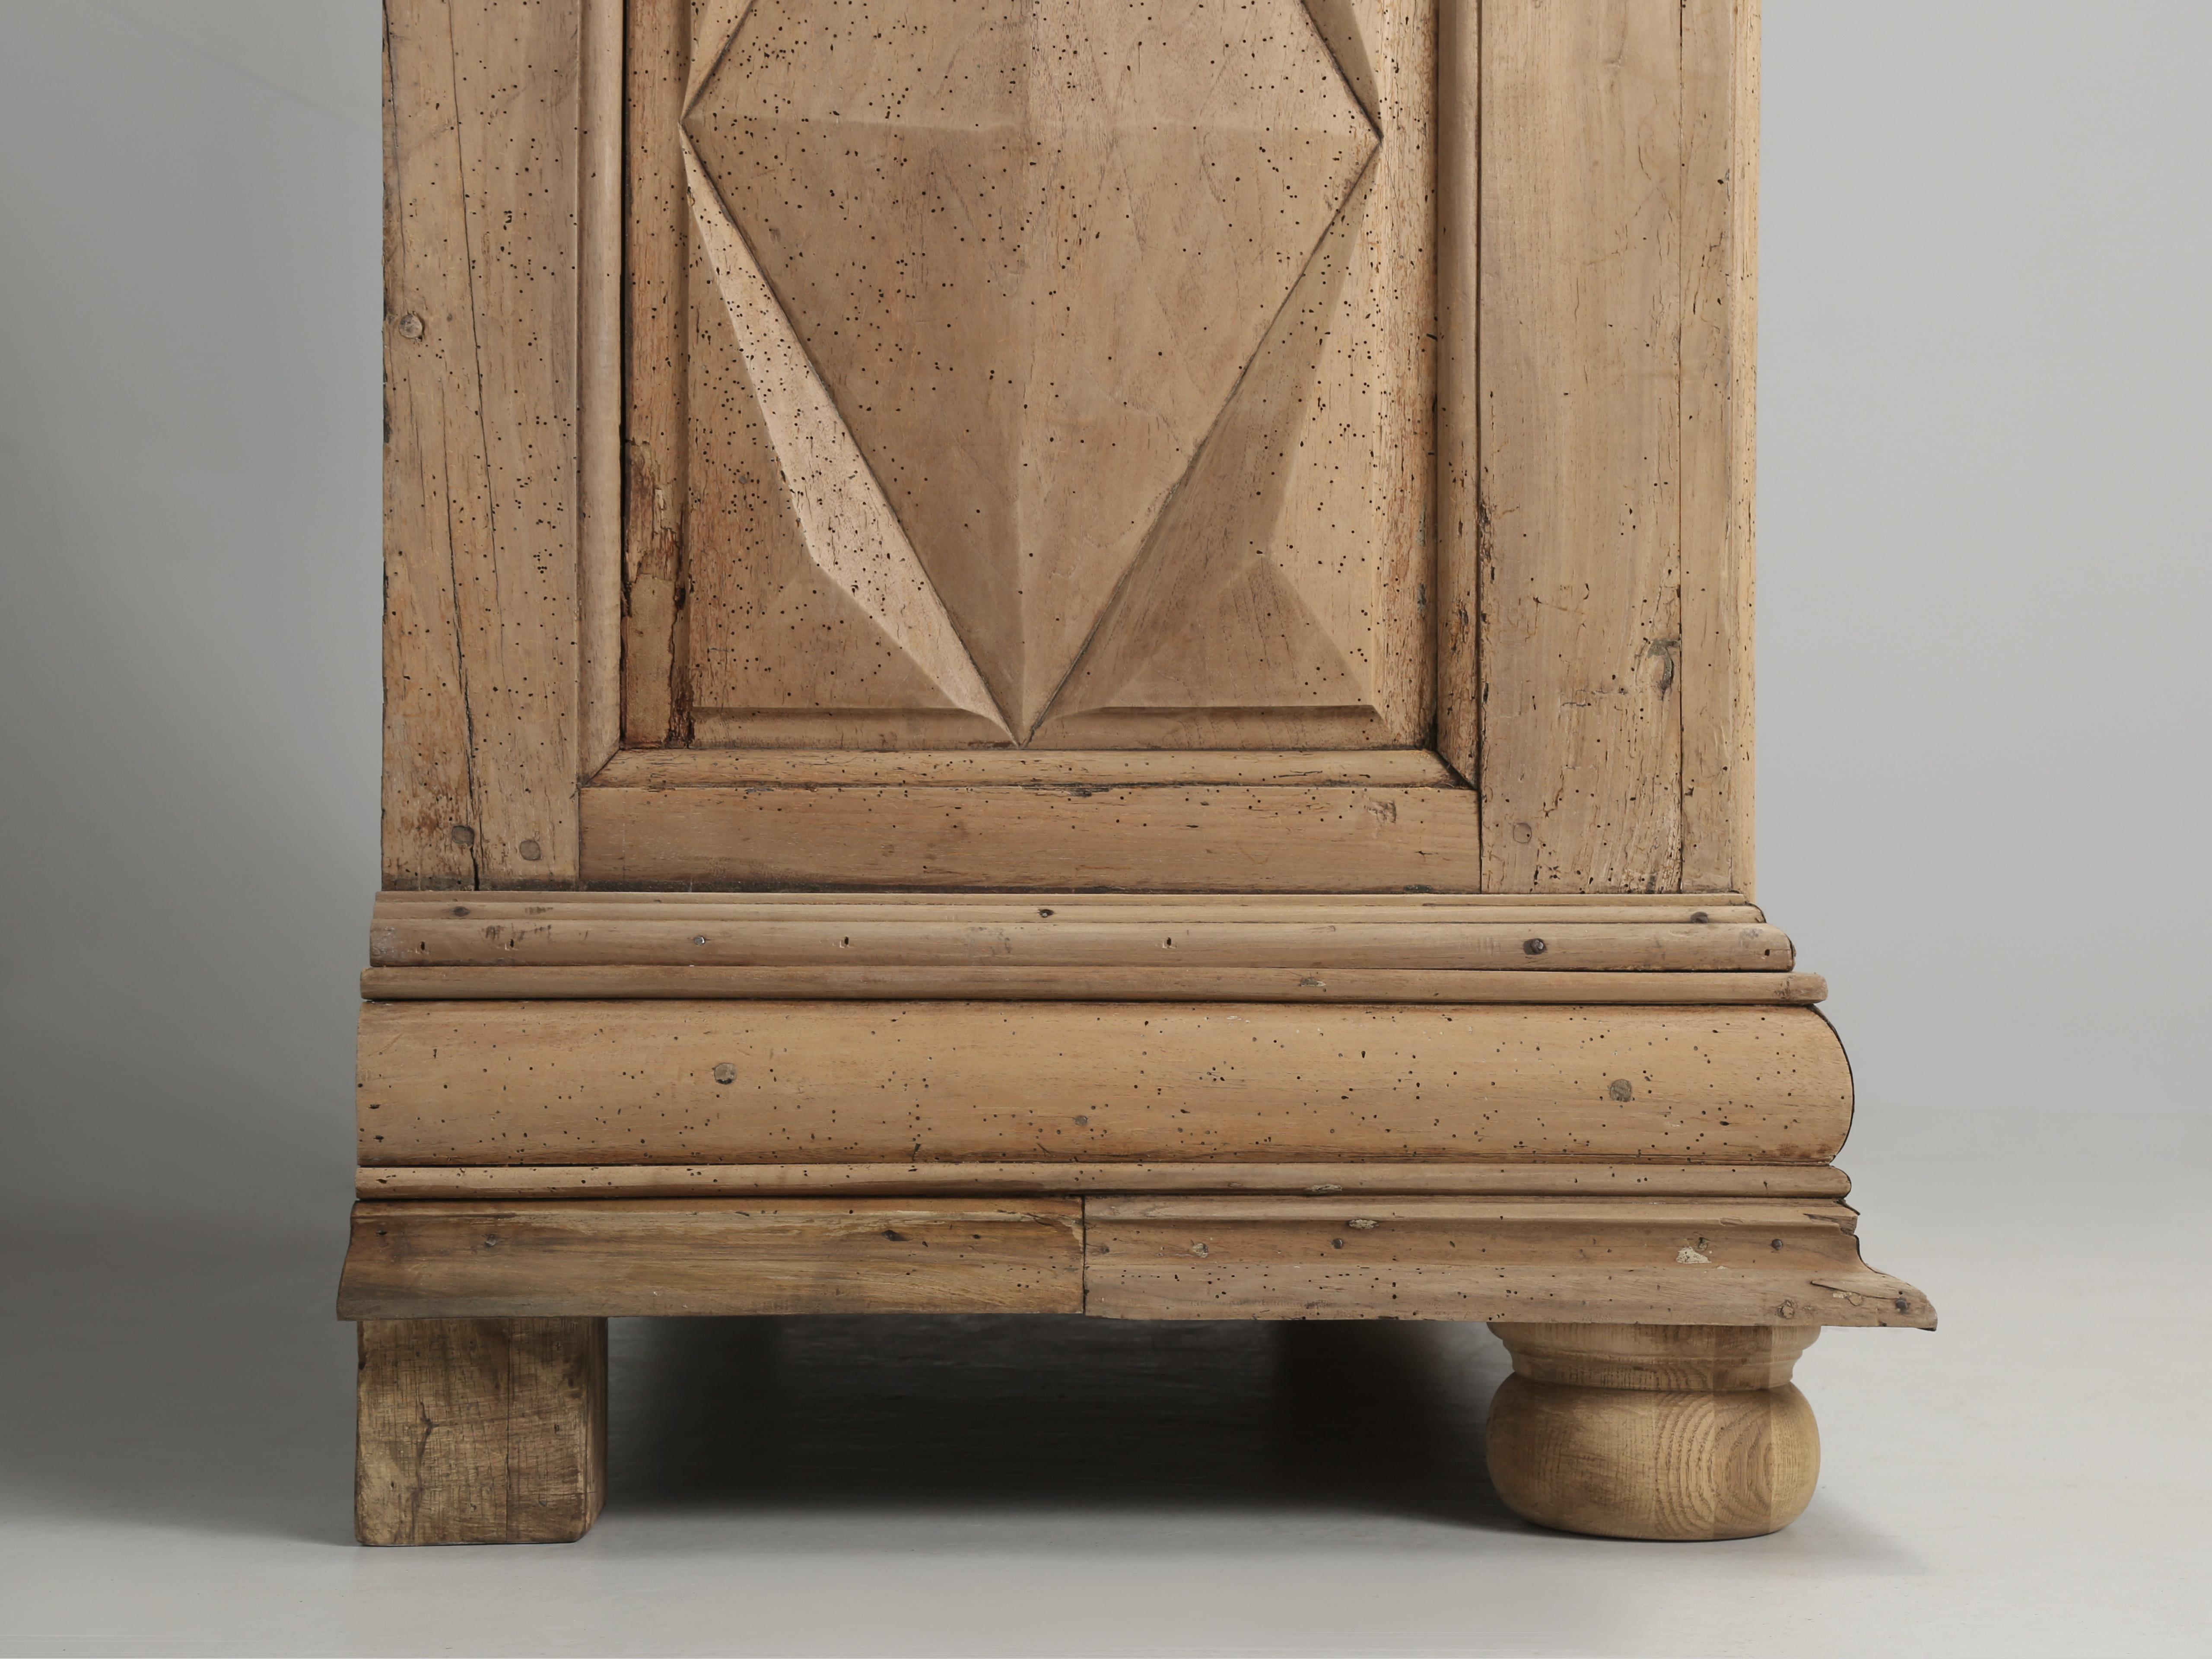 Hand-Carved Antique French Armoire in Natural Washed Walnut Very Original Over 300-Years Old